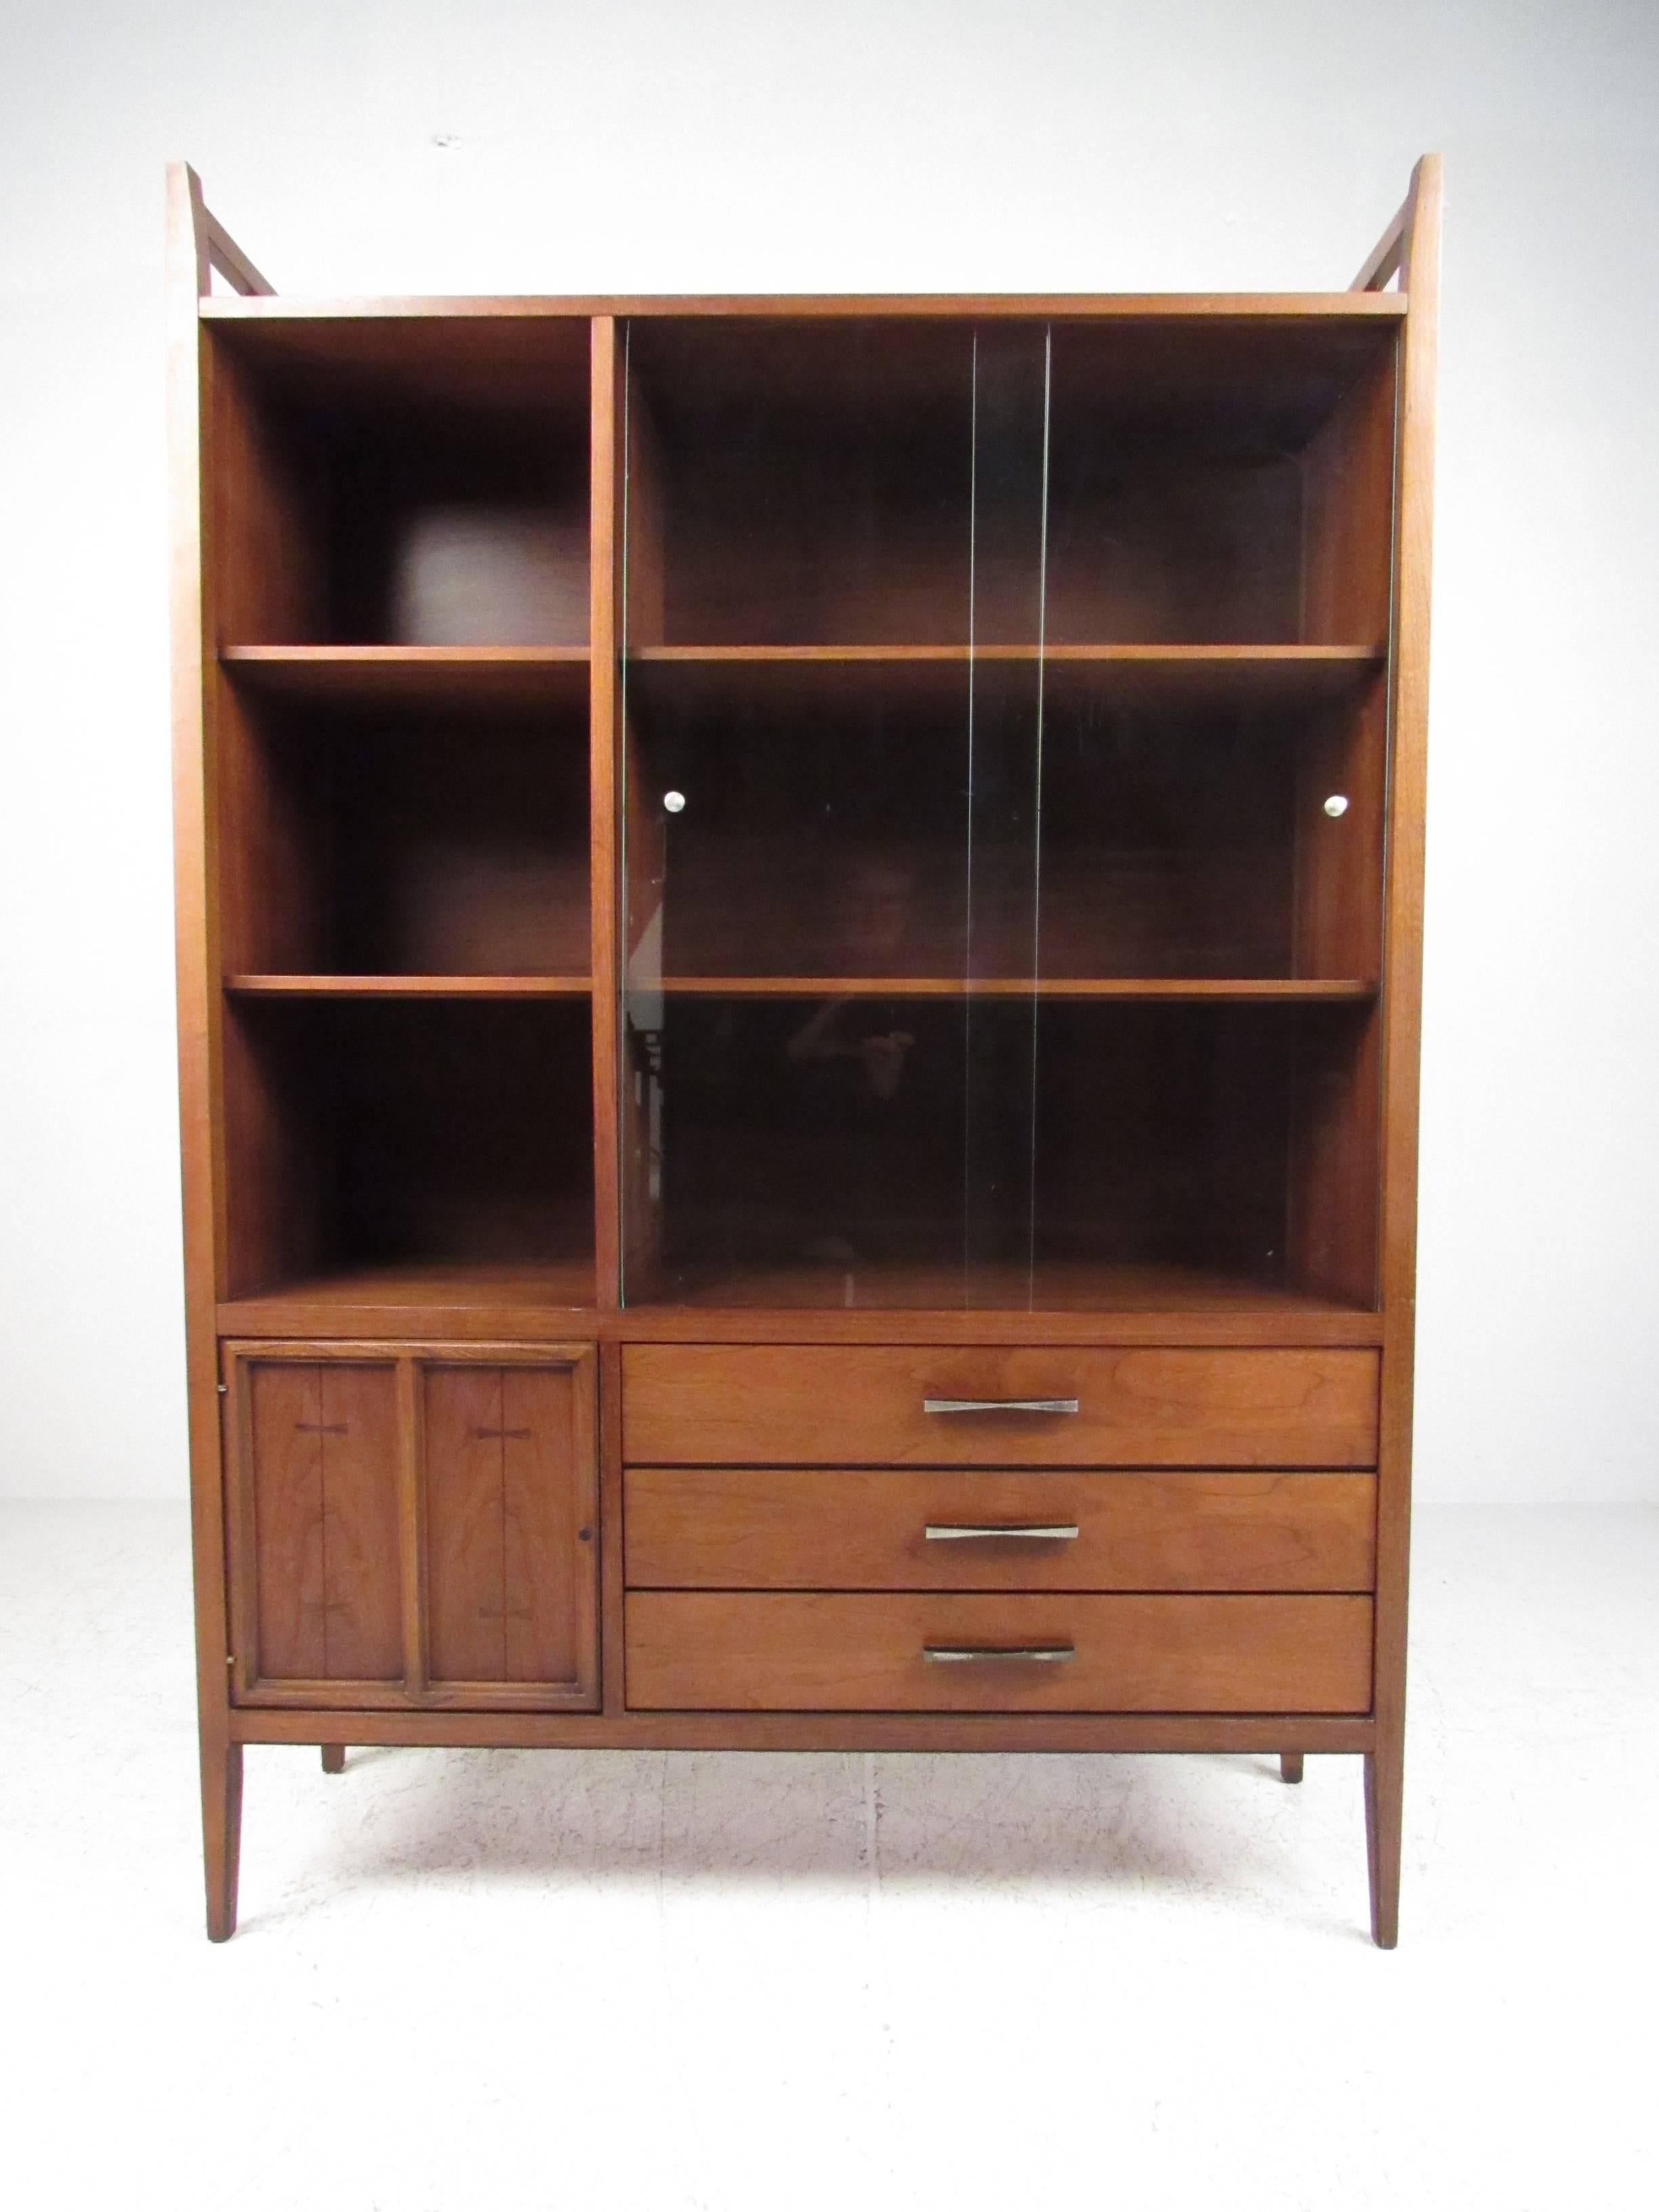 This vintage modern walnut cabinet features spacious storage shelves, lower cabinet and drawers for storage, and a stylish Mid-Century design. Unique drawer pulls and inlaid bowtie details add to it's vintage American charm. Please confirm item